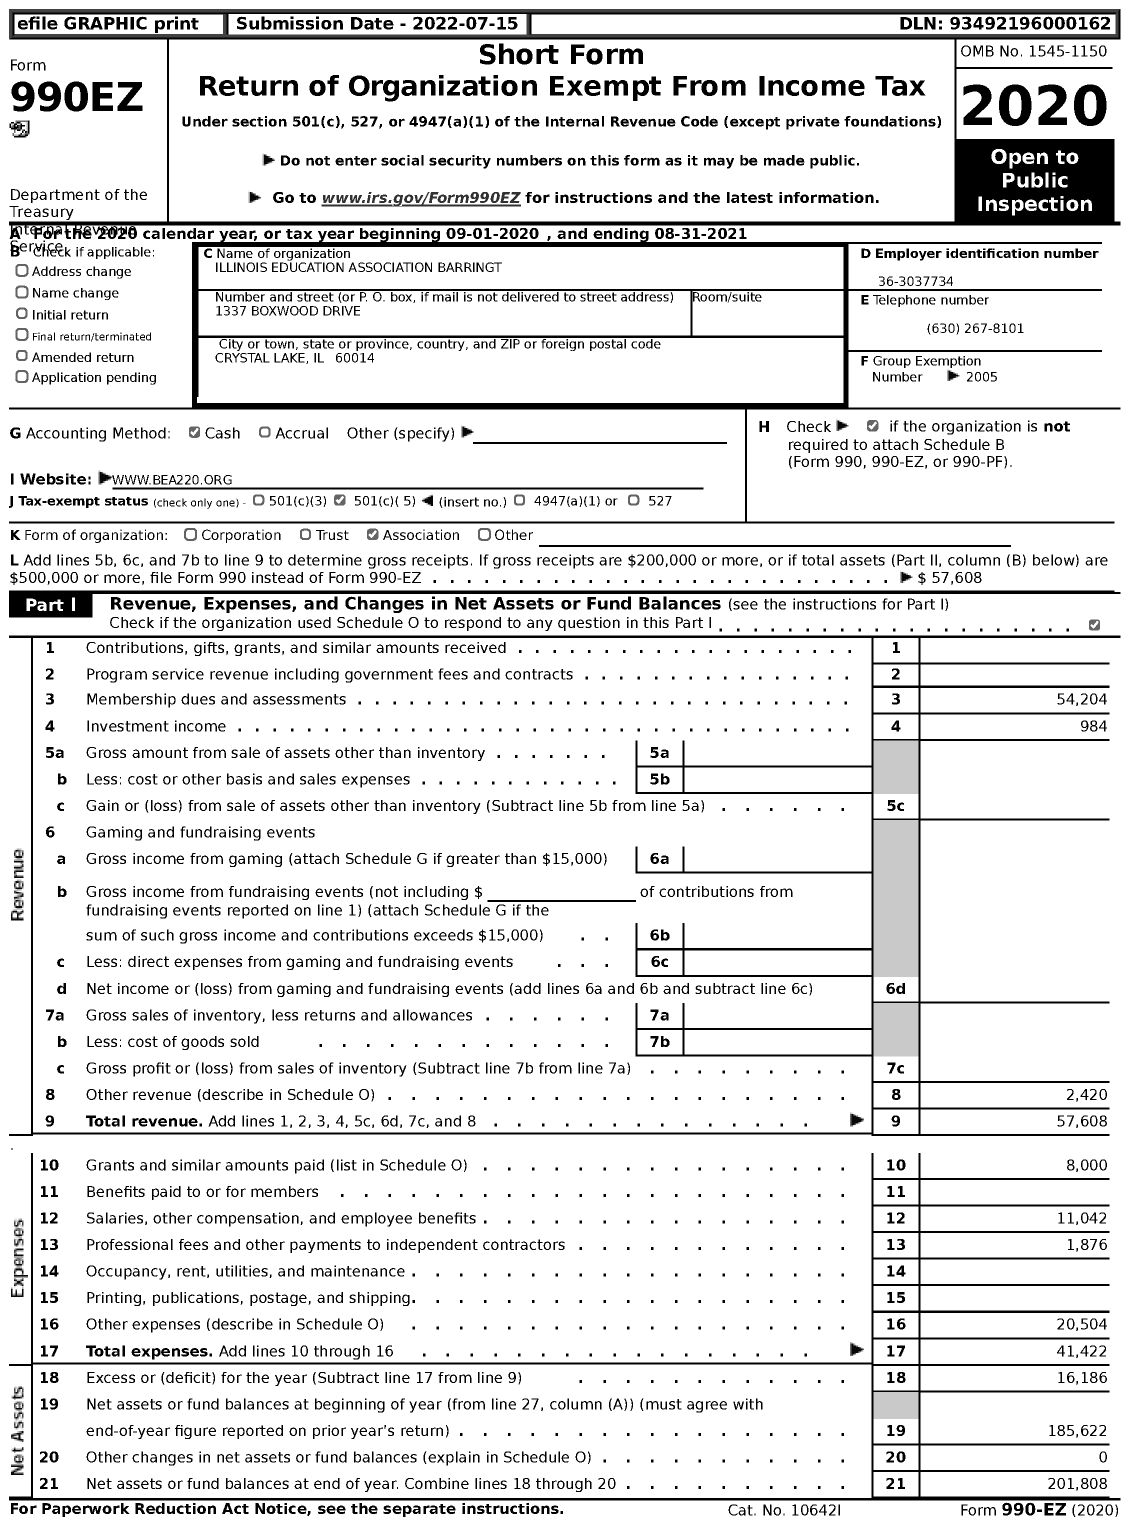 Image of first page of 2020 Form 990EZ for Illinois Education Association - Barrington Ea